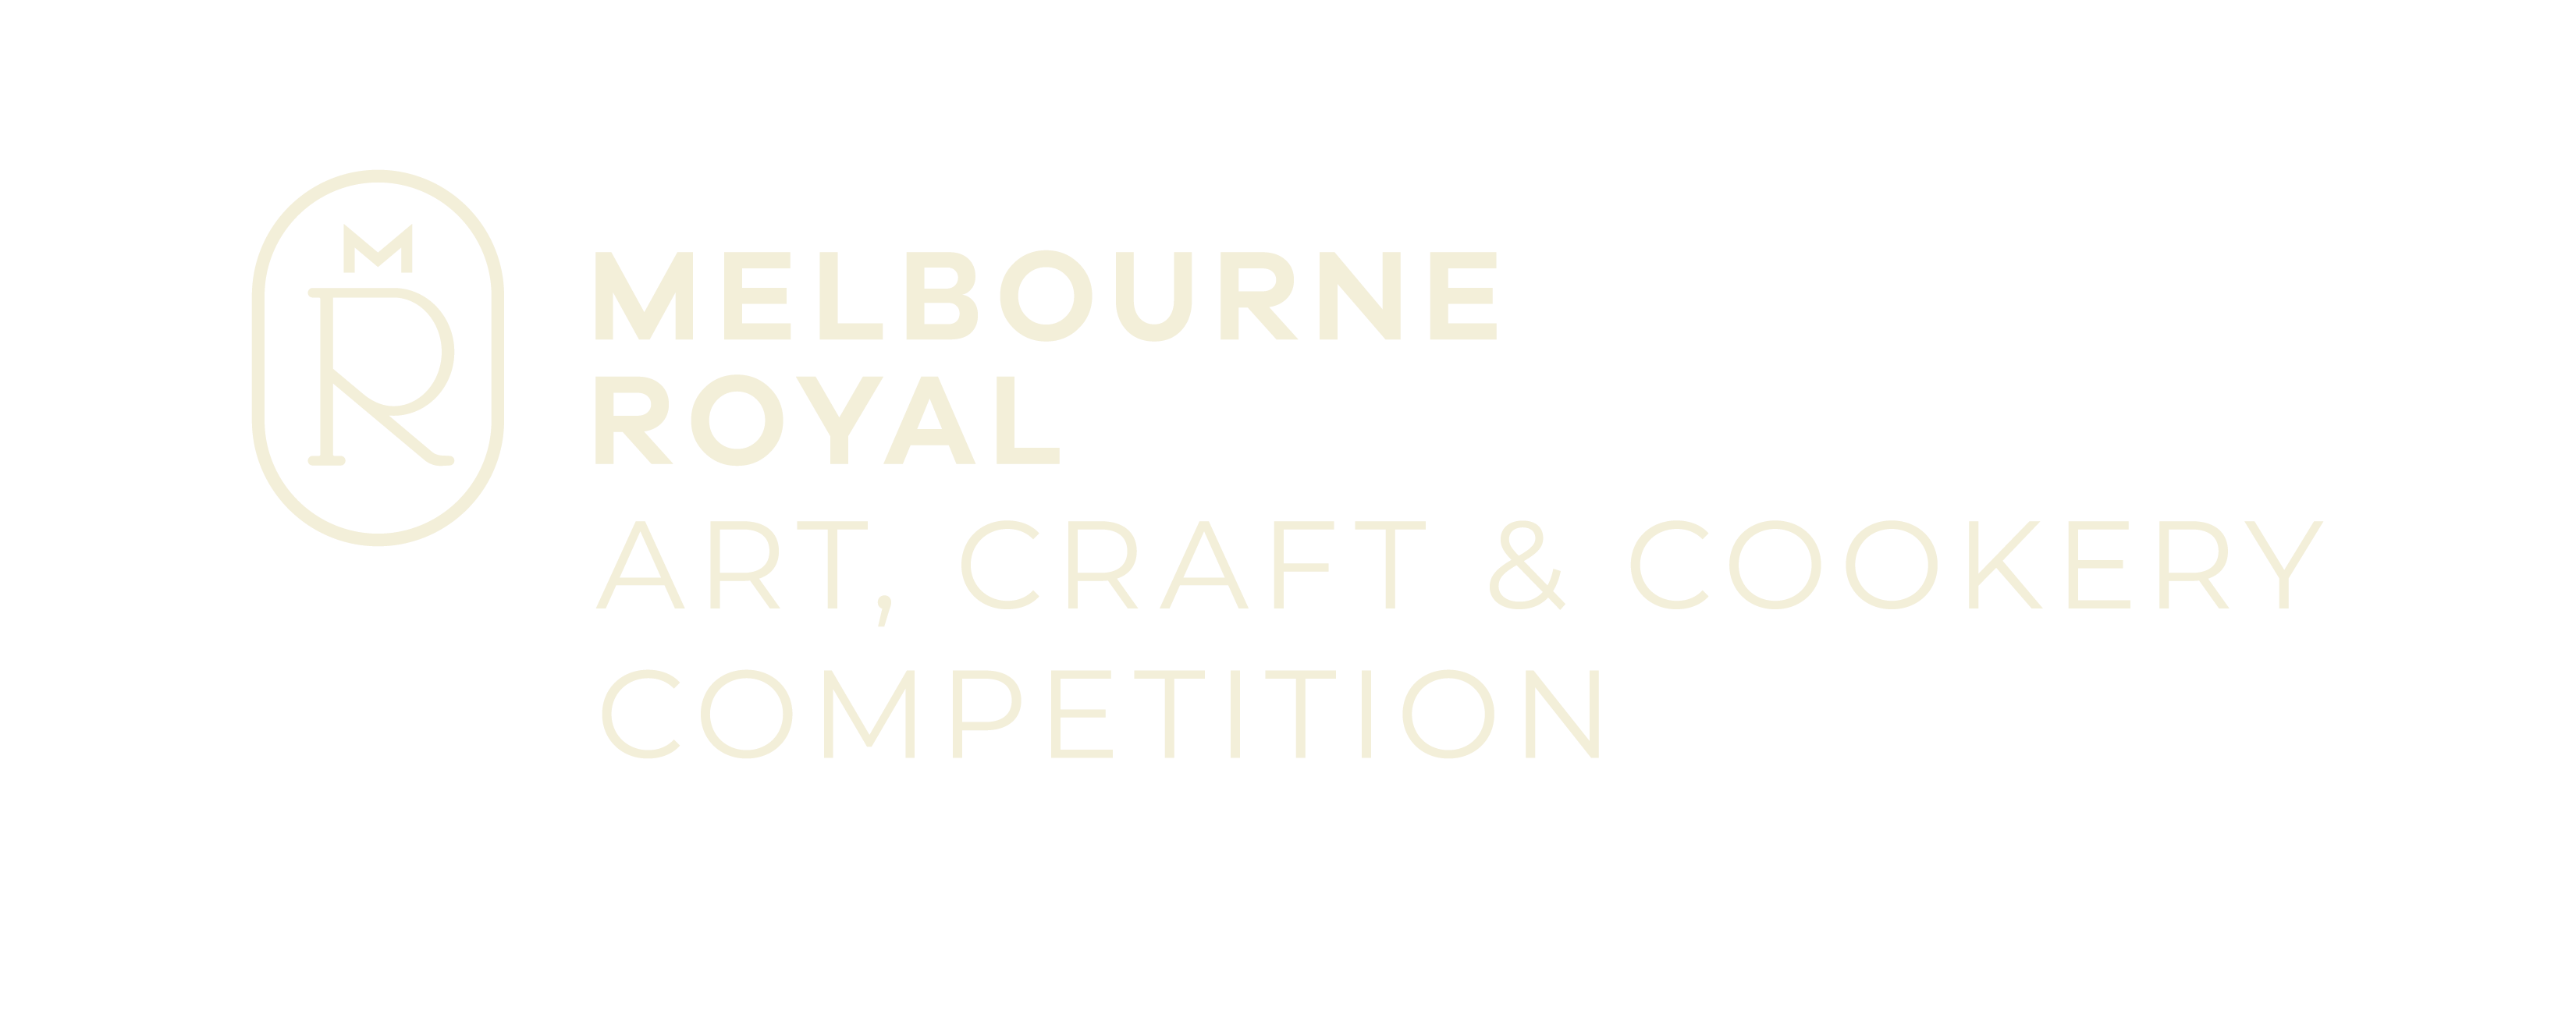 Melbourne Royal | Art, Craft & Cookery Competition